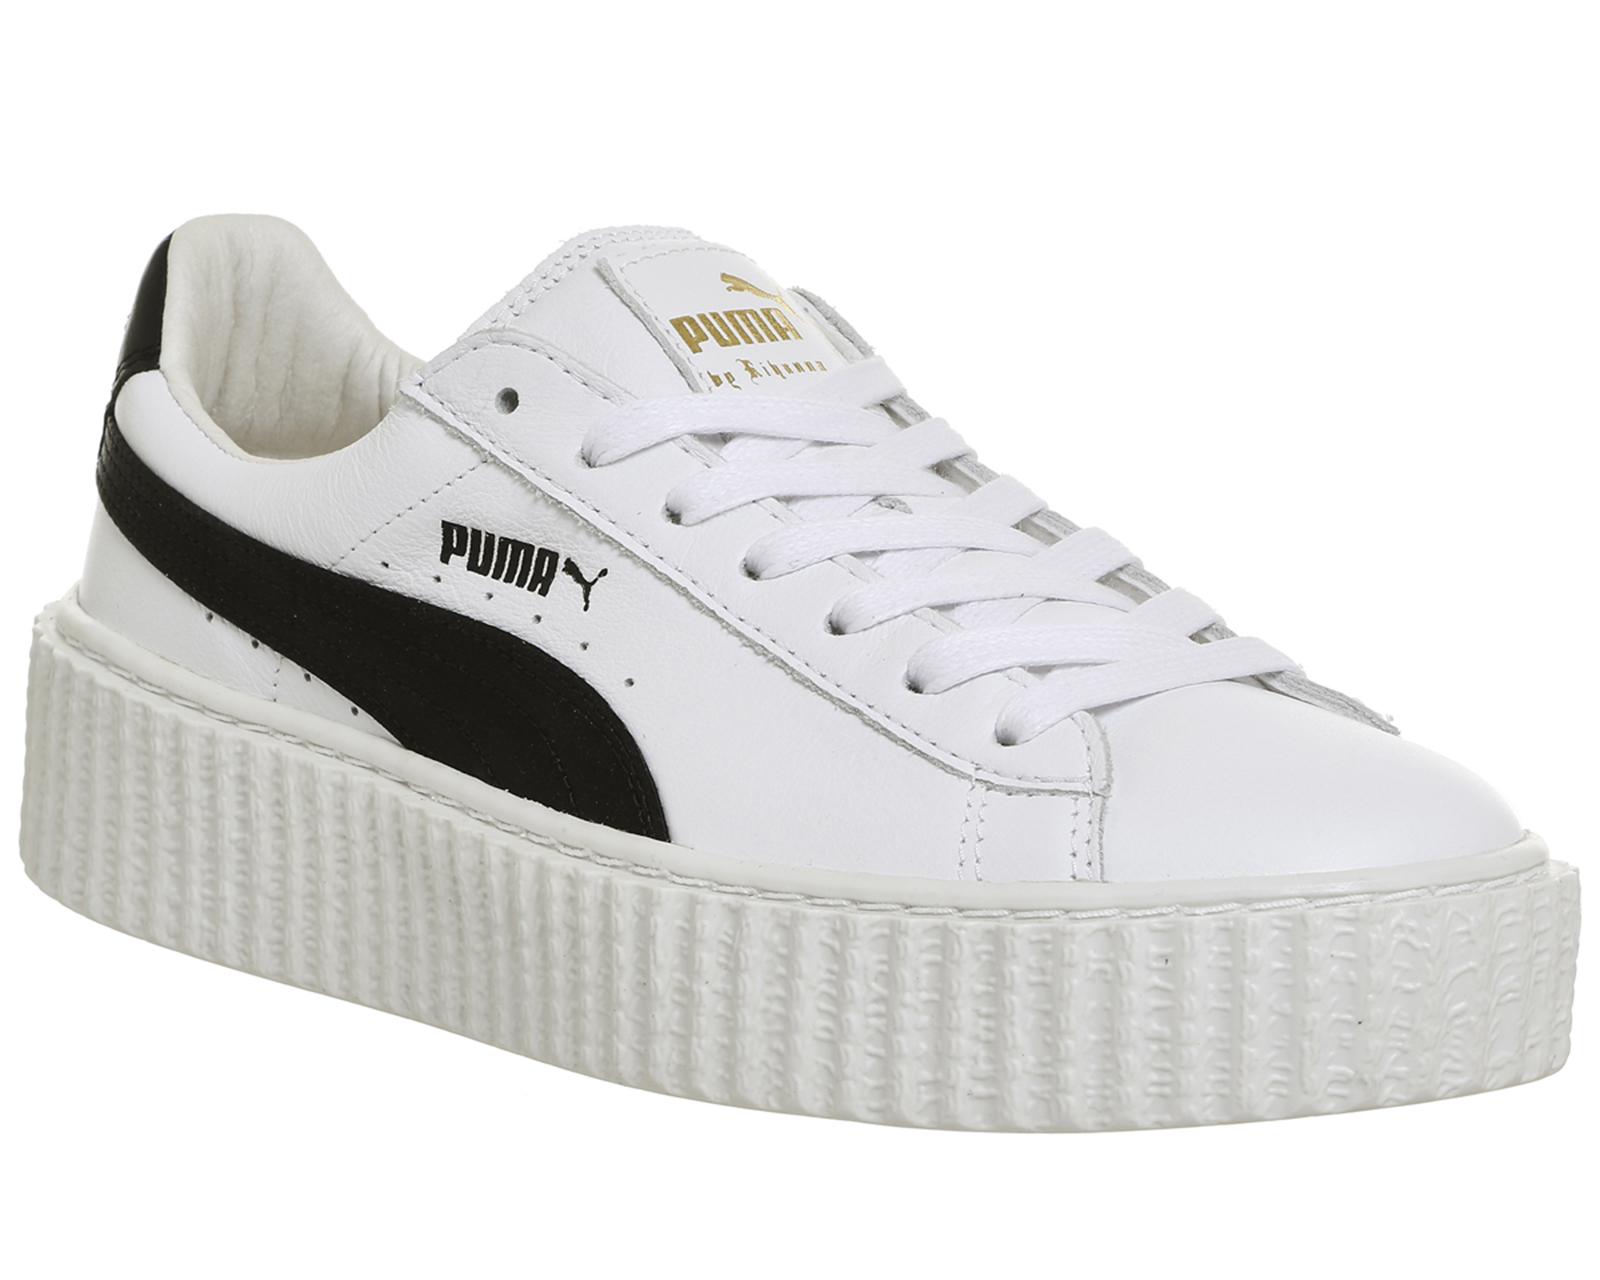 PUMA Suede Basket Creepers in White - Lyst